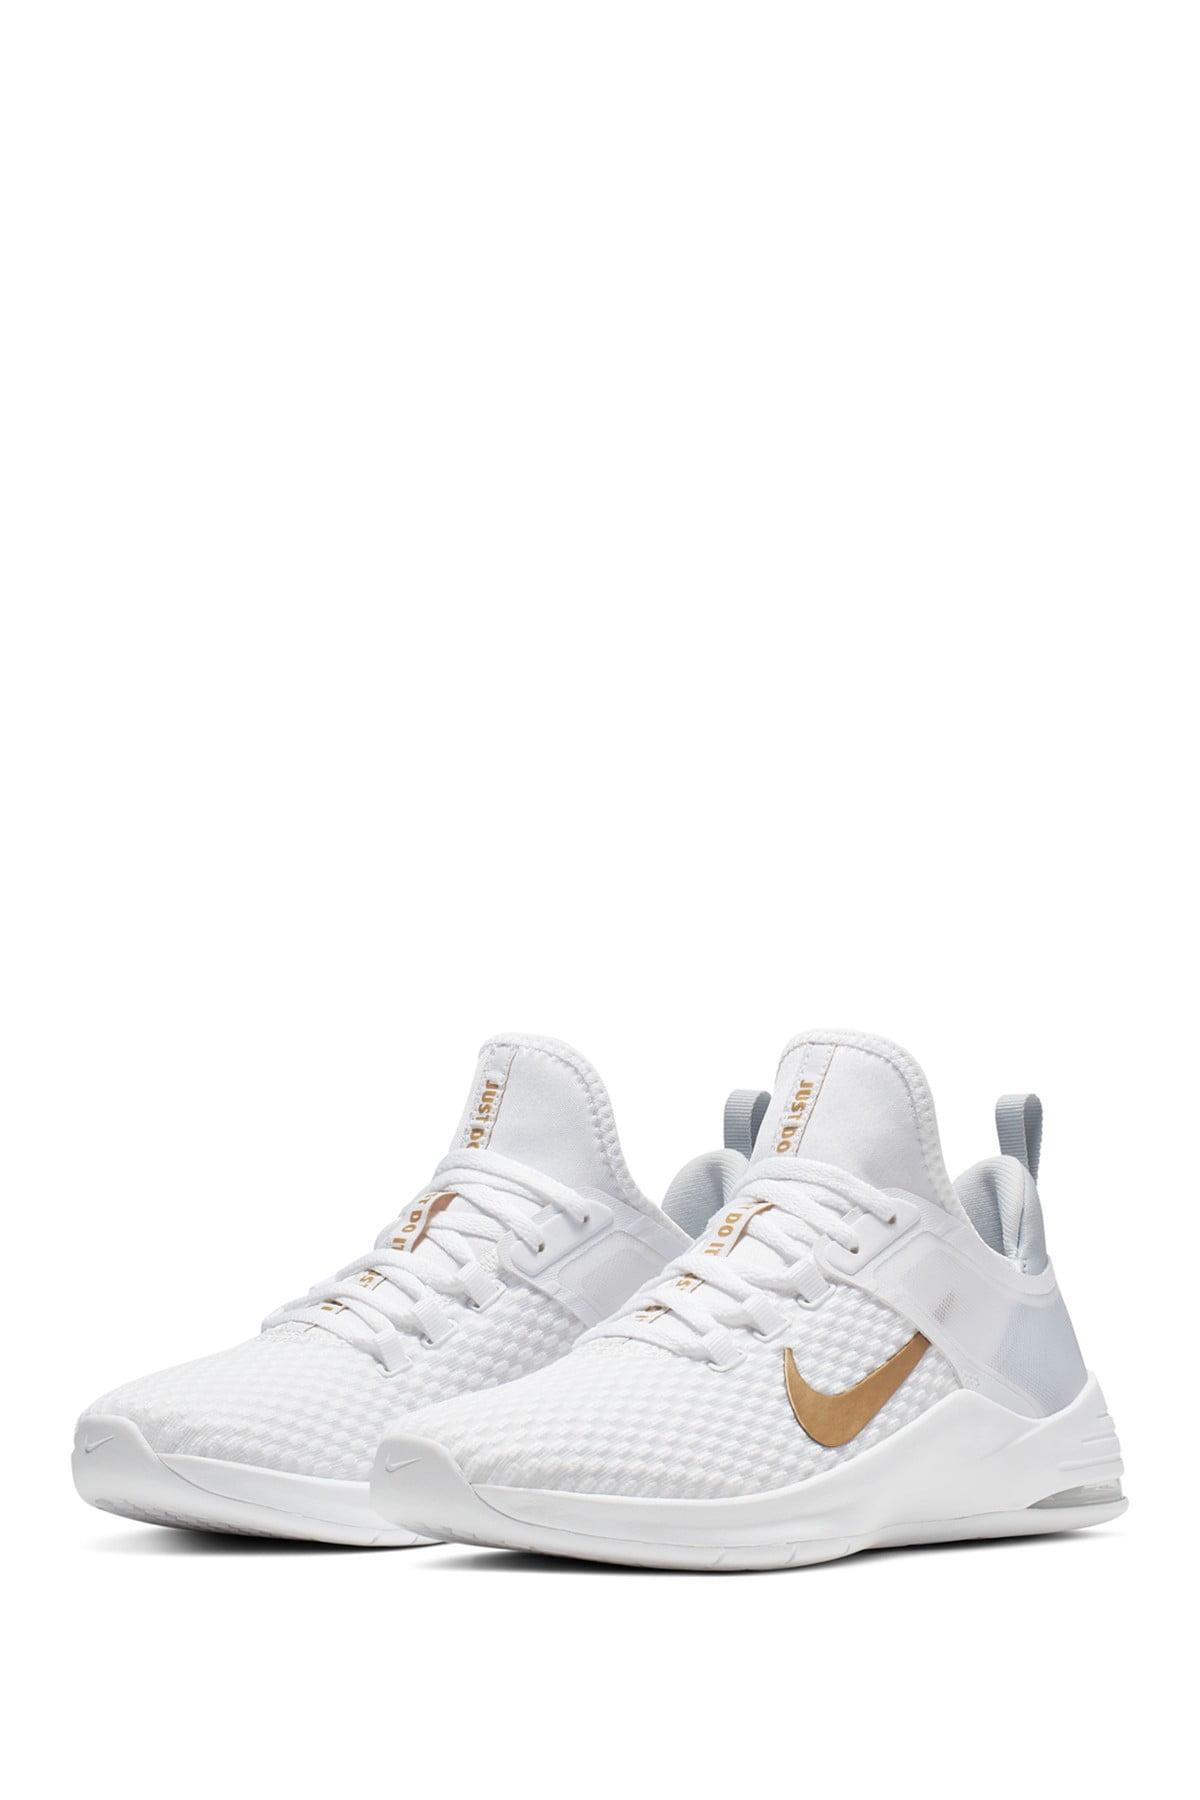 Nike Air Max Bella Tr 2 Training Shoe in White | Lyst